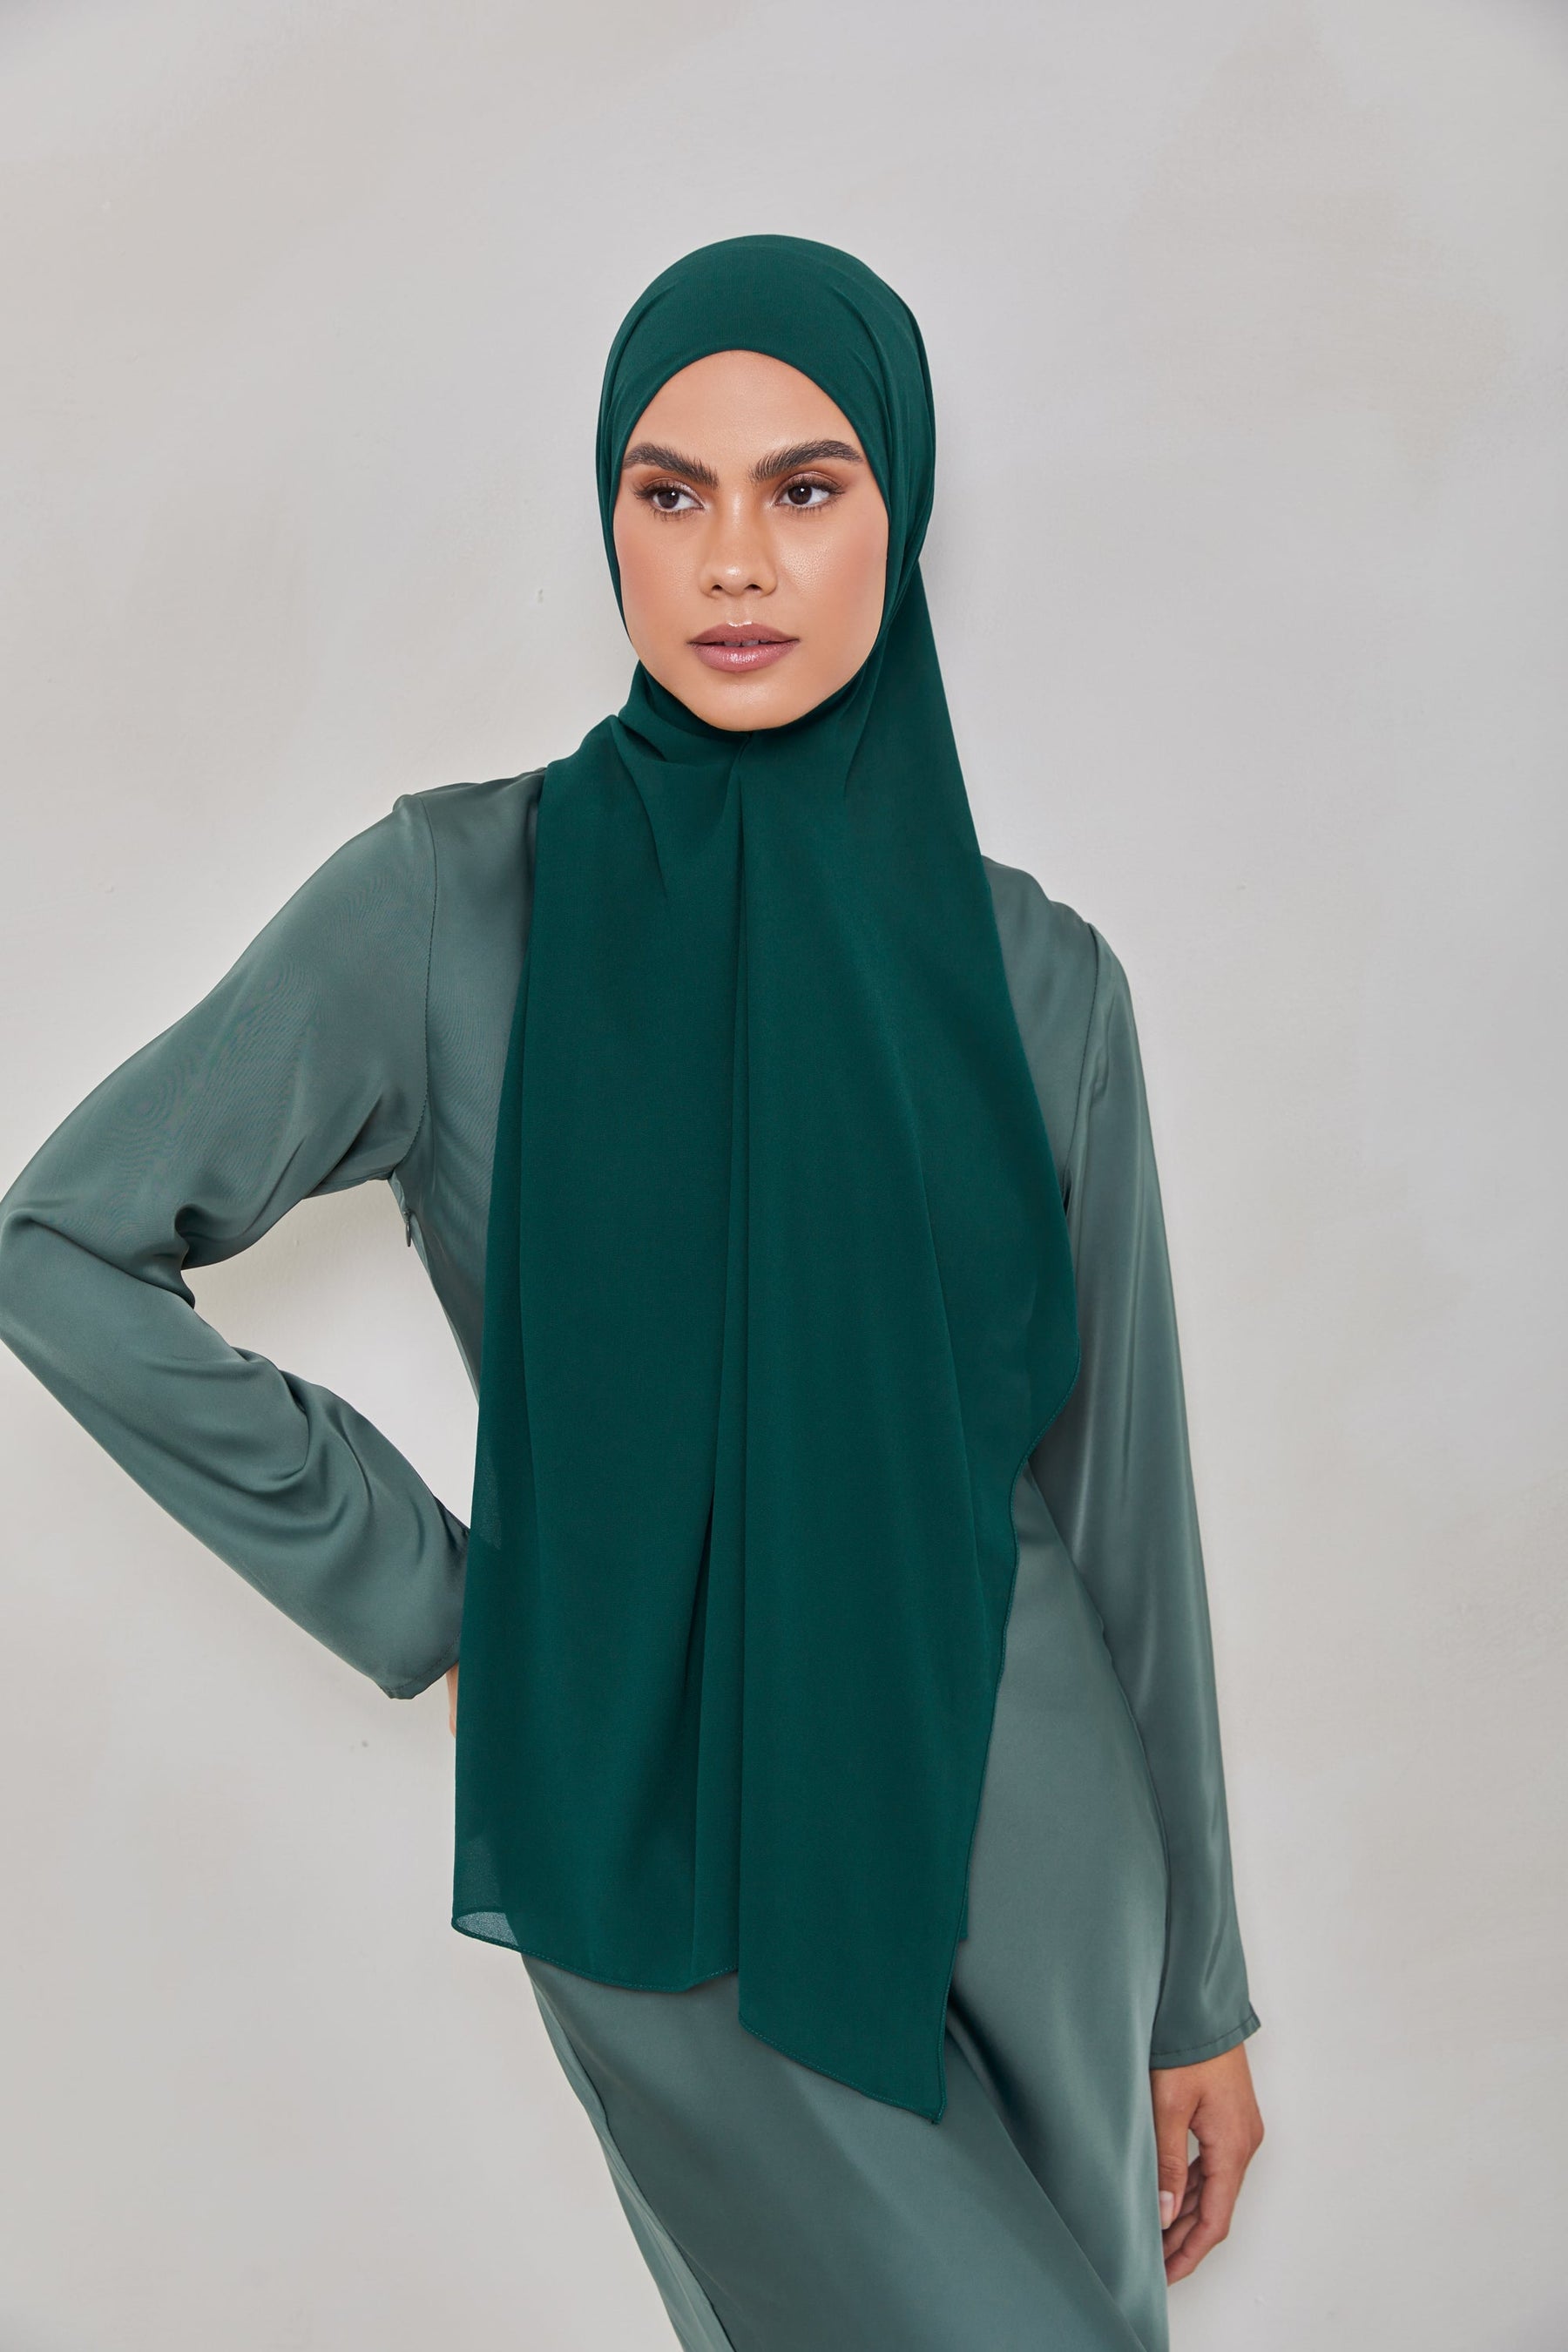 Essential Chiffon Hijab - Deep Teal Scarves & Shawls Veiled Collection 